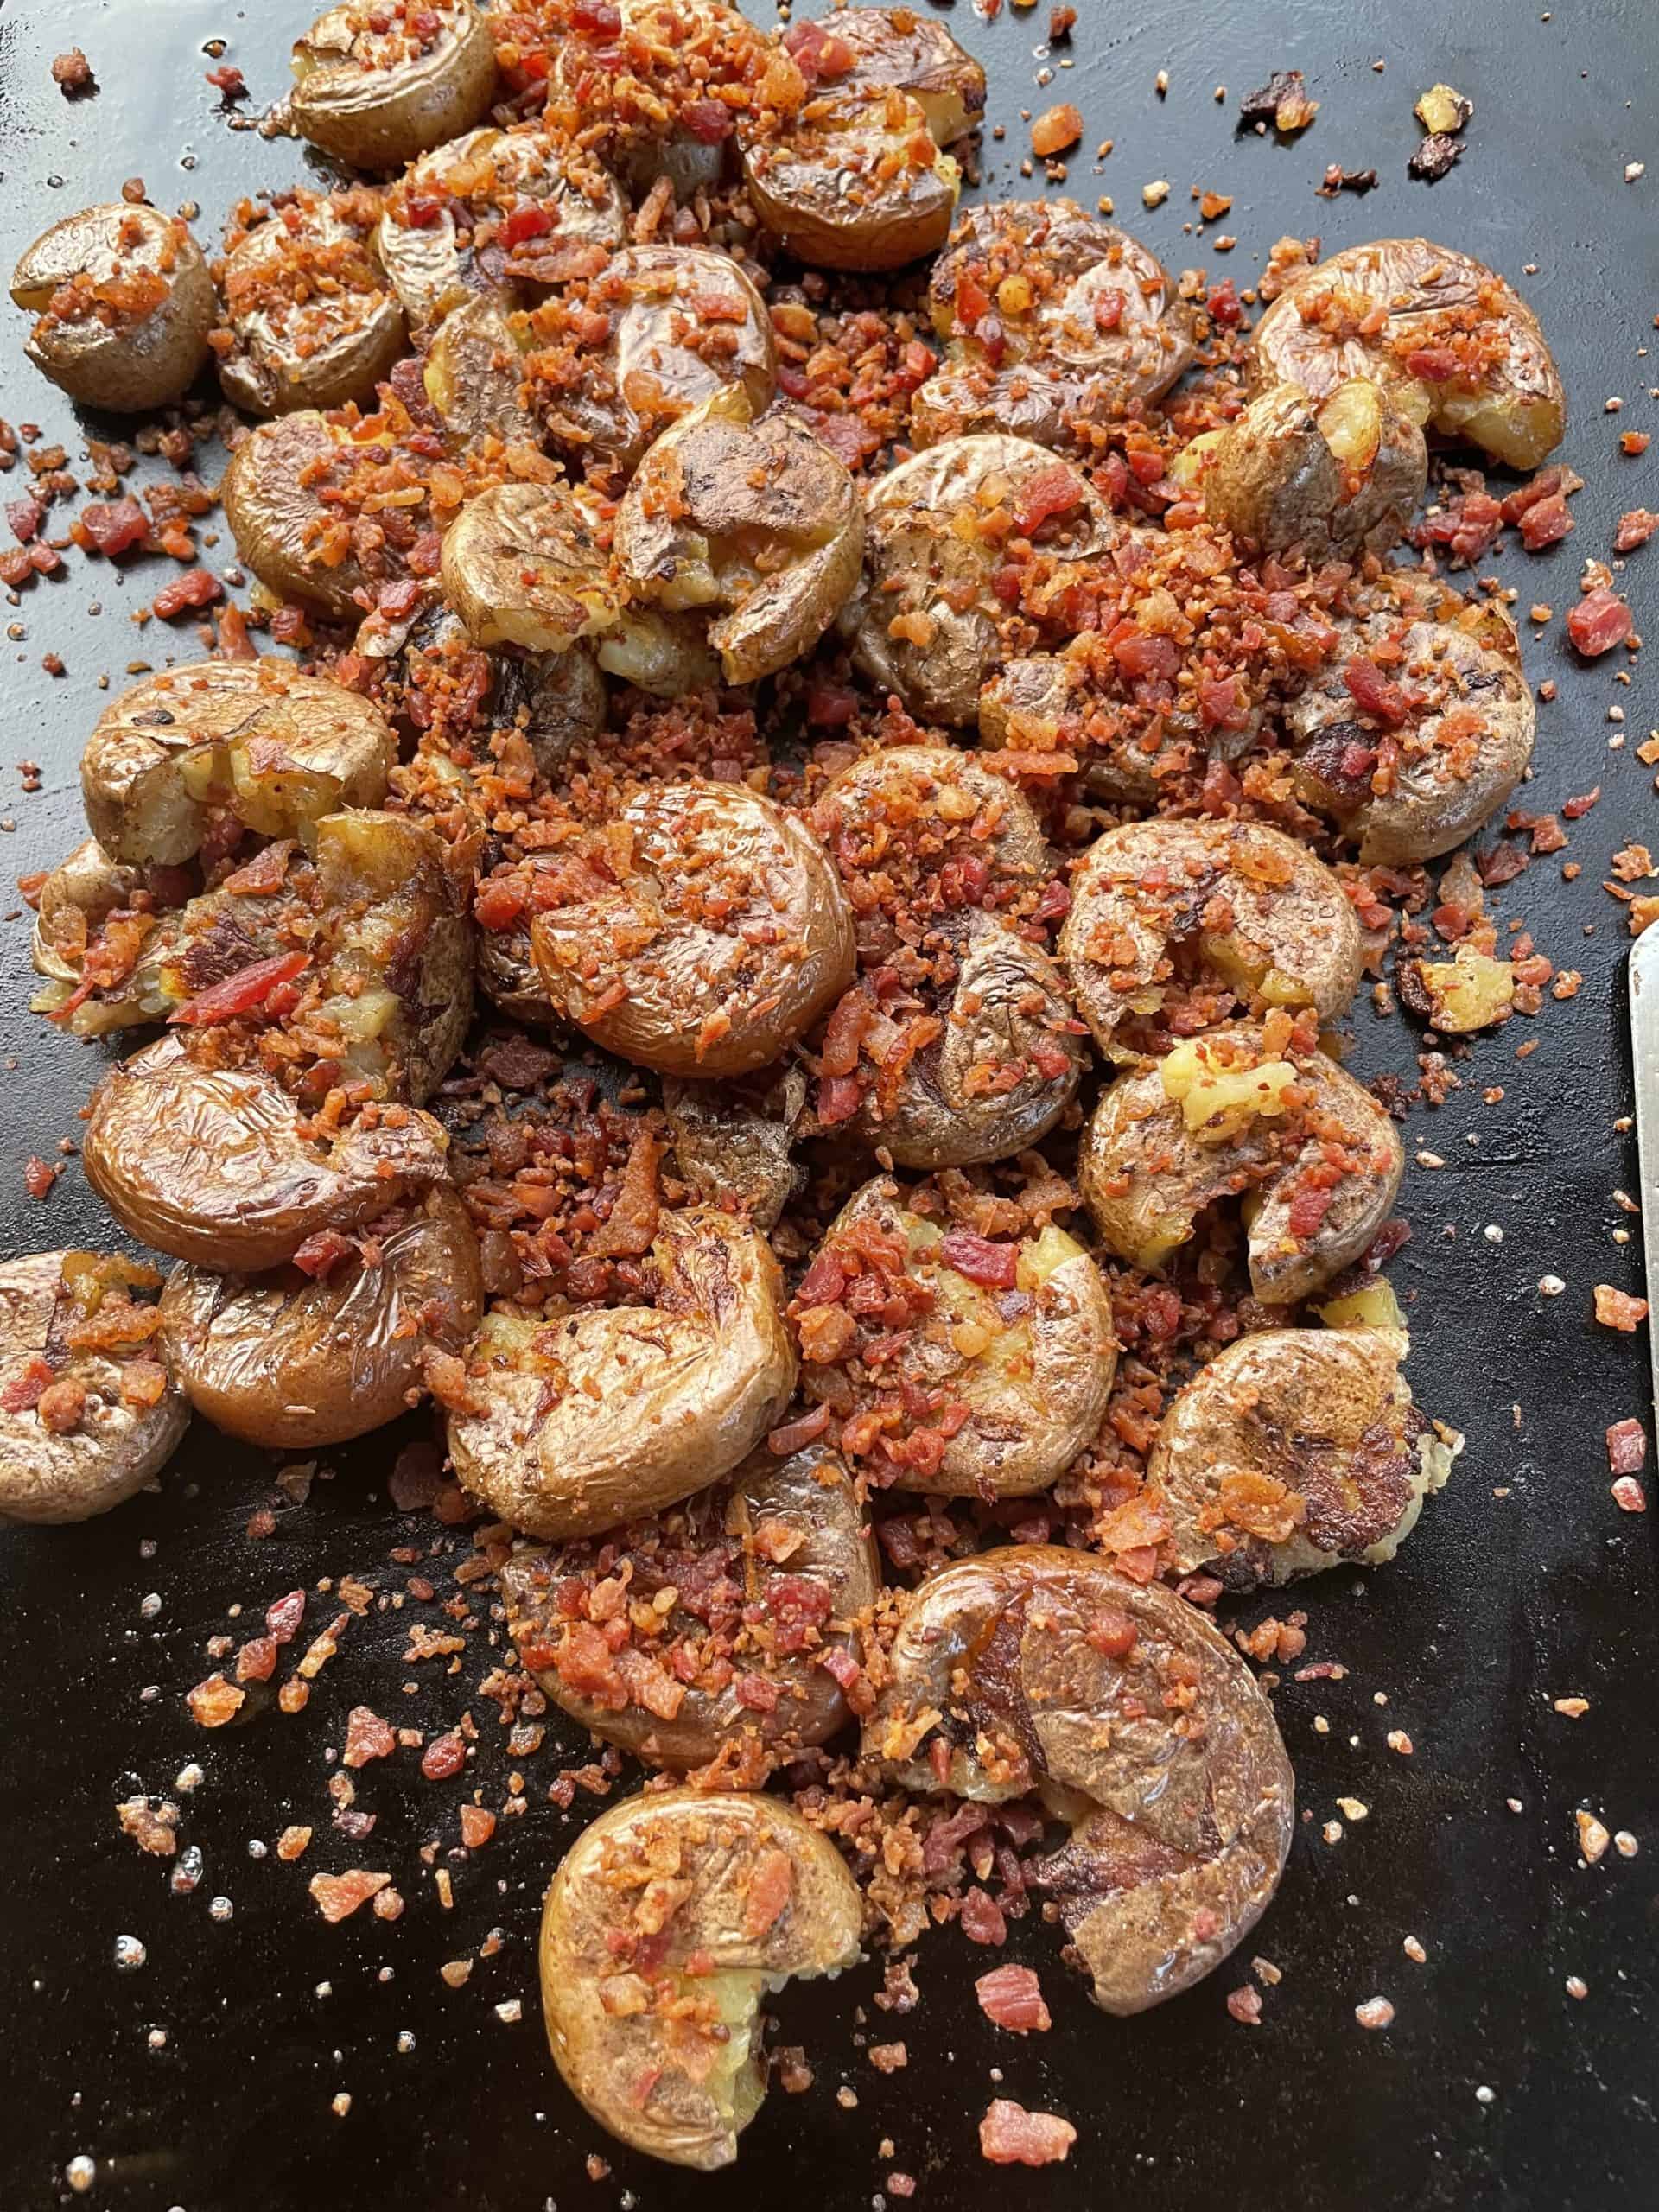 Add Bacon Pieces to the top of the crispy smashed potatoes.